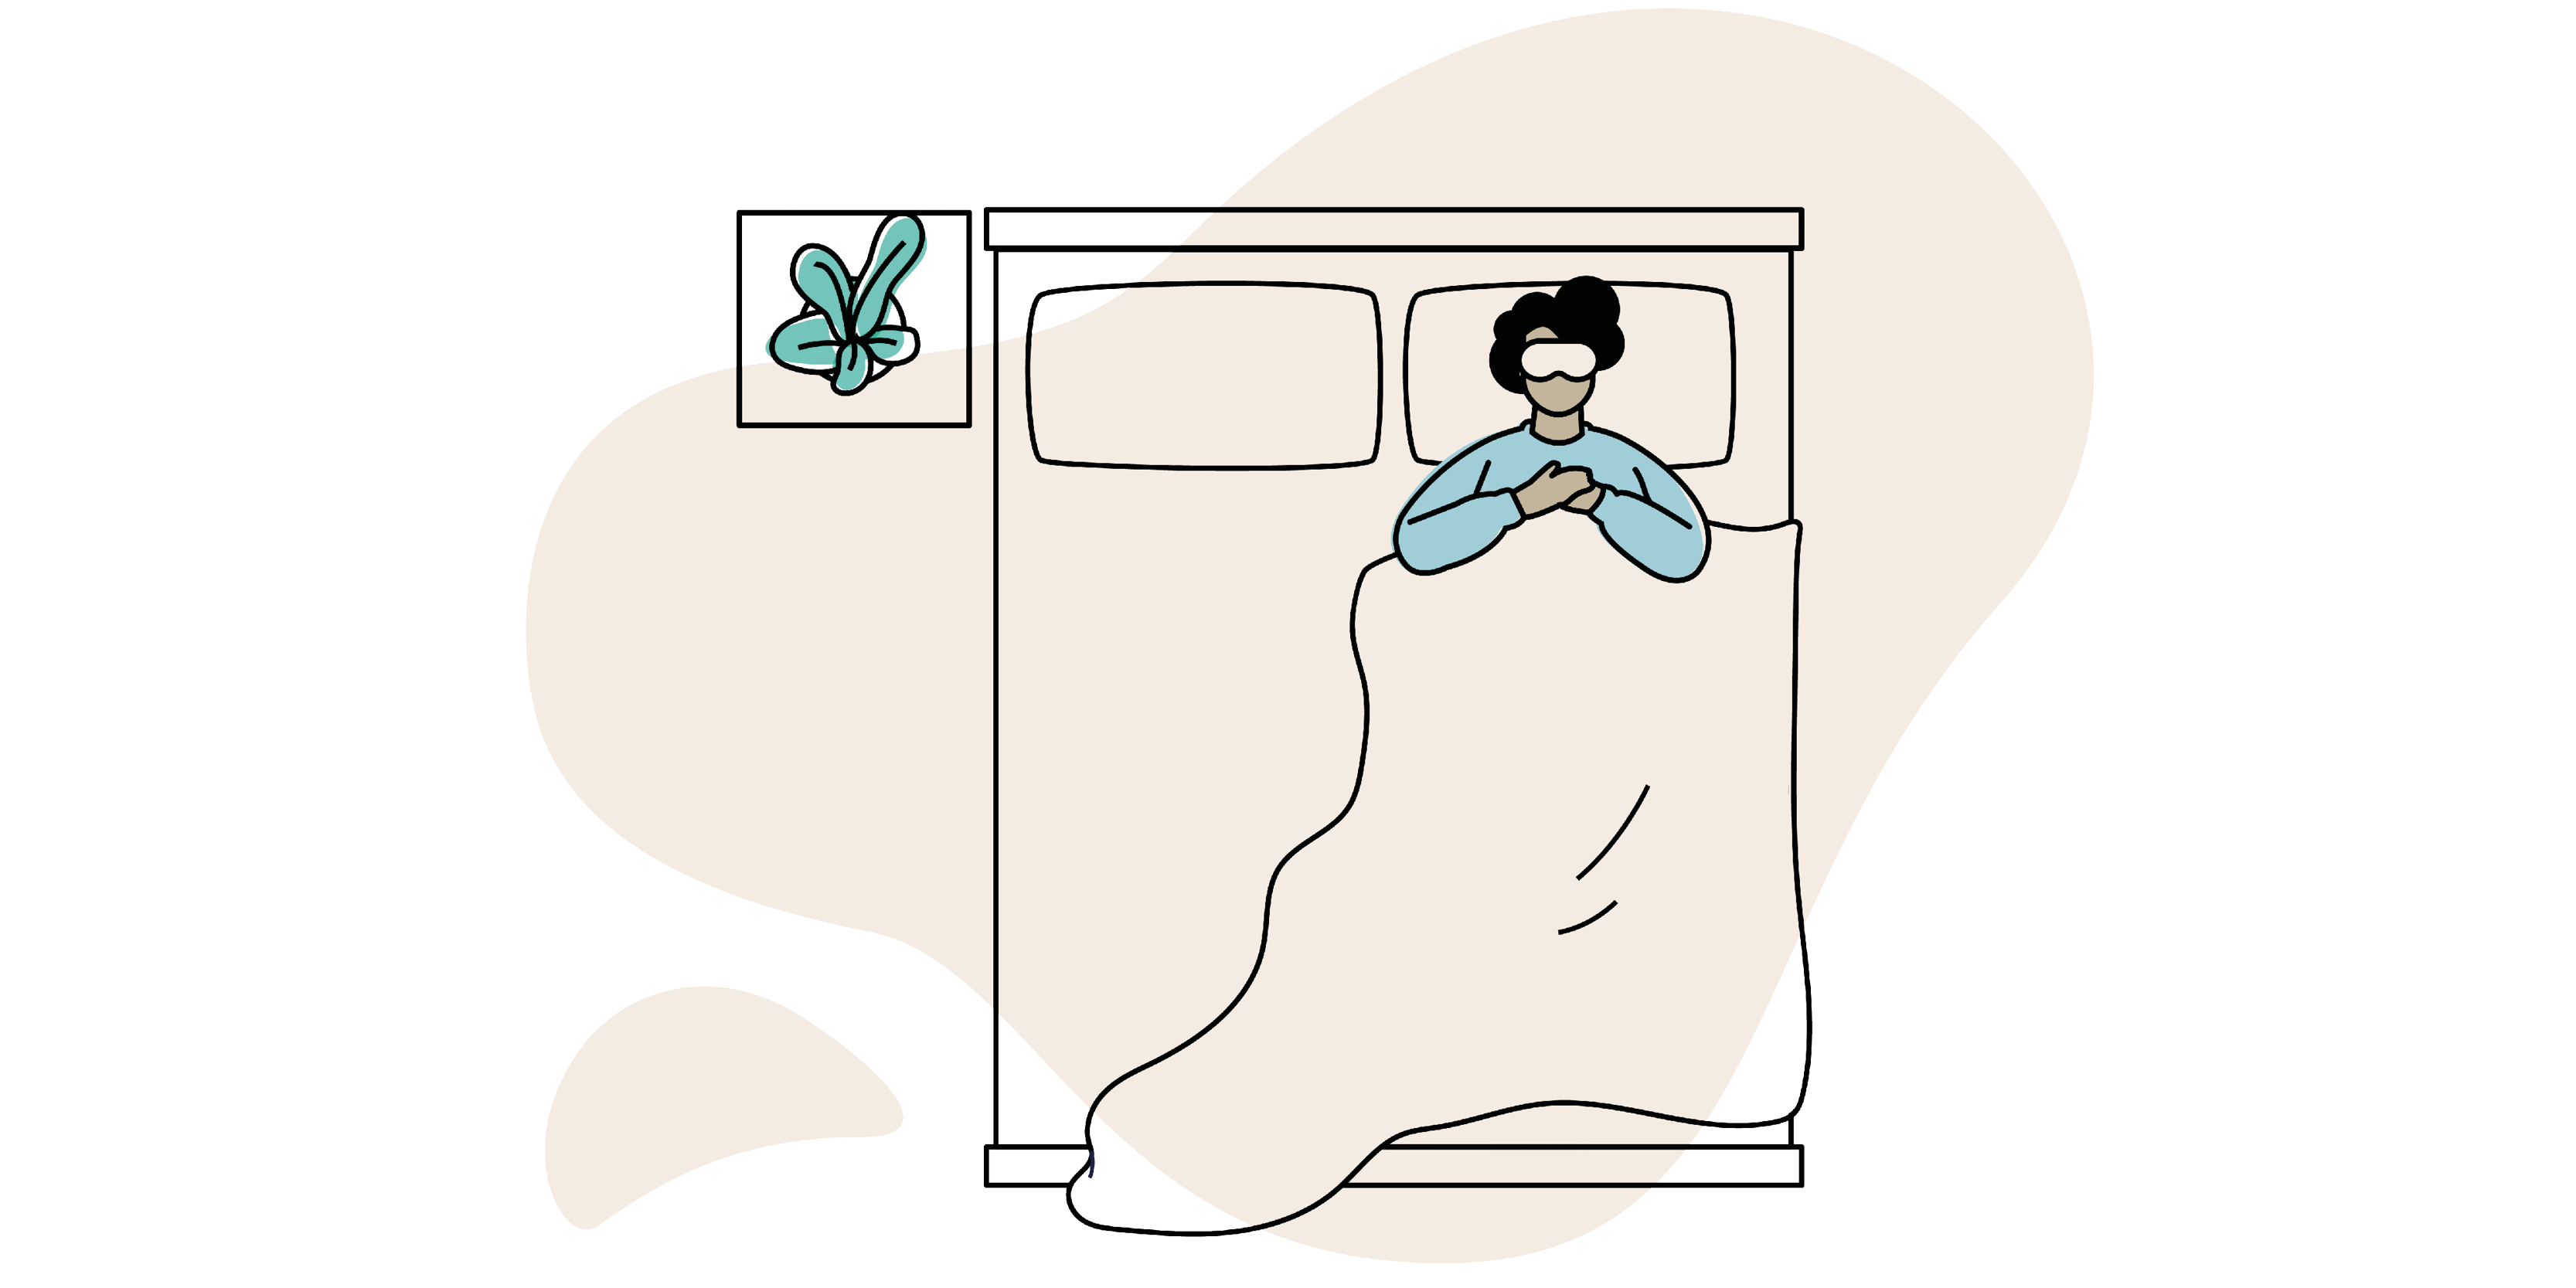 An illustration of a person lying in bed wearing an eye mask